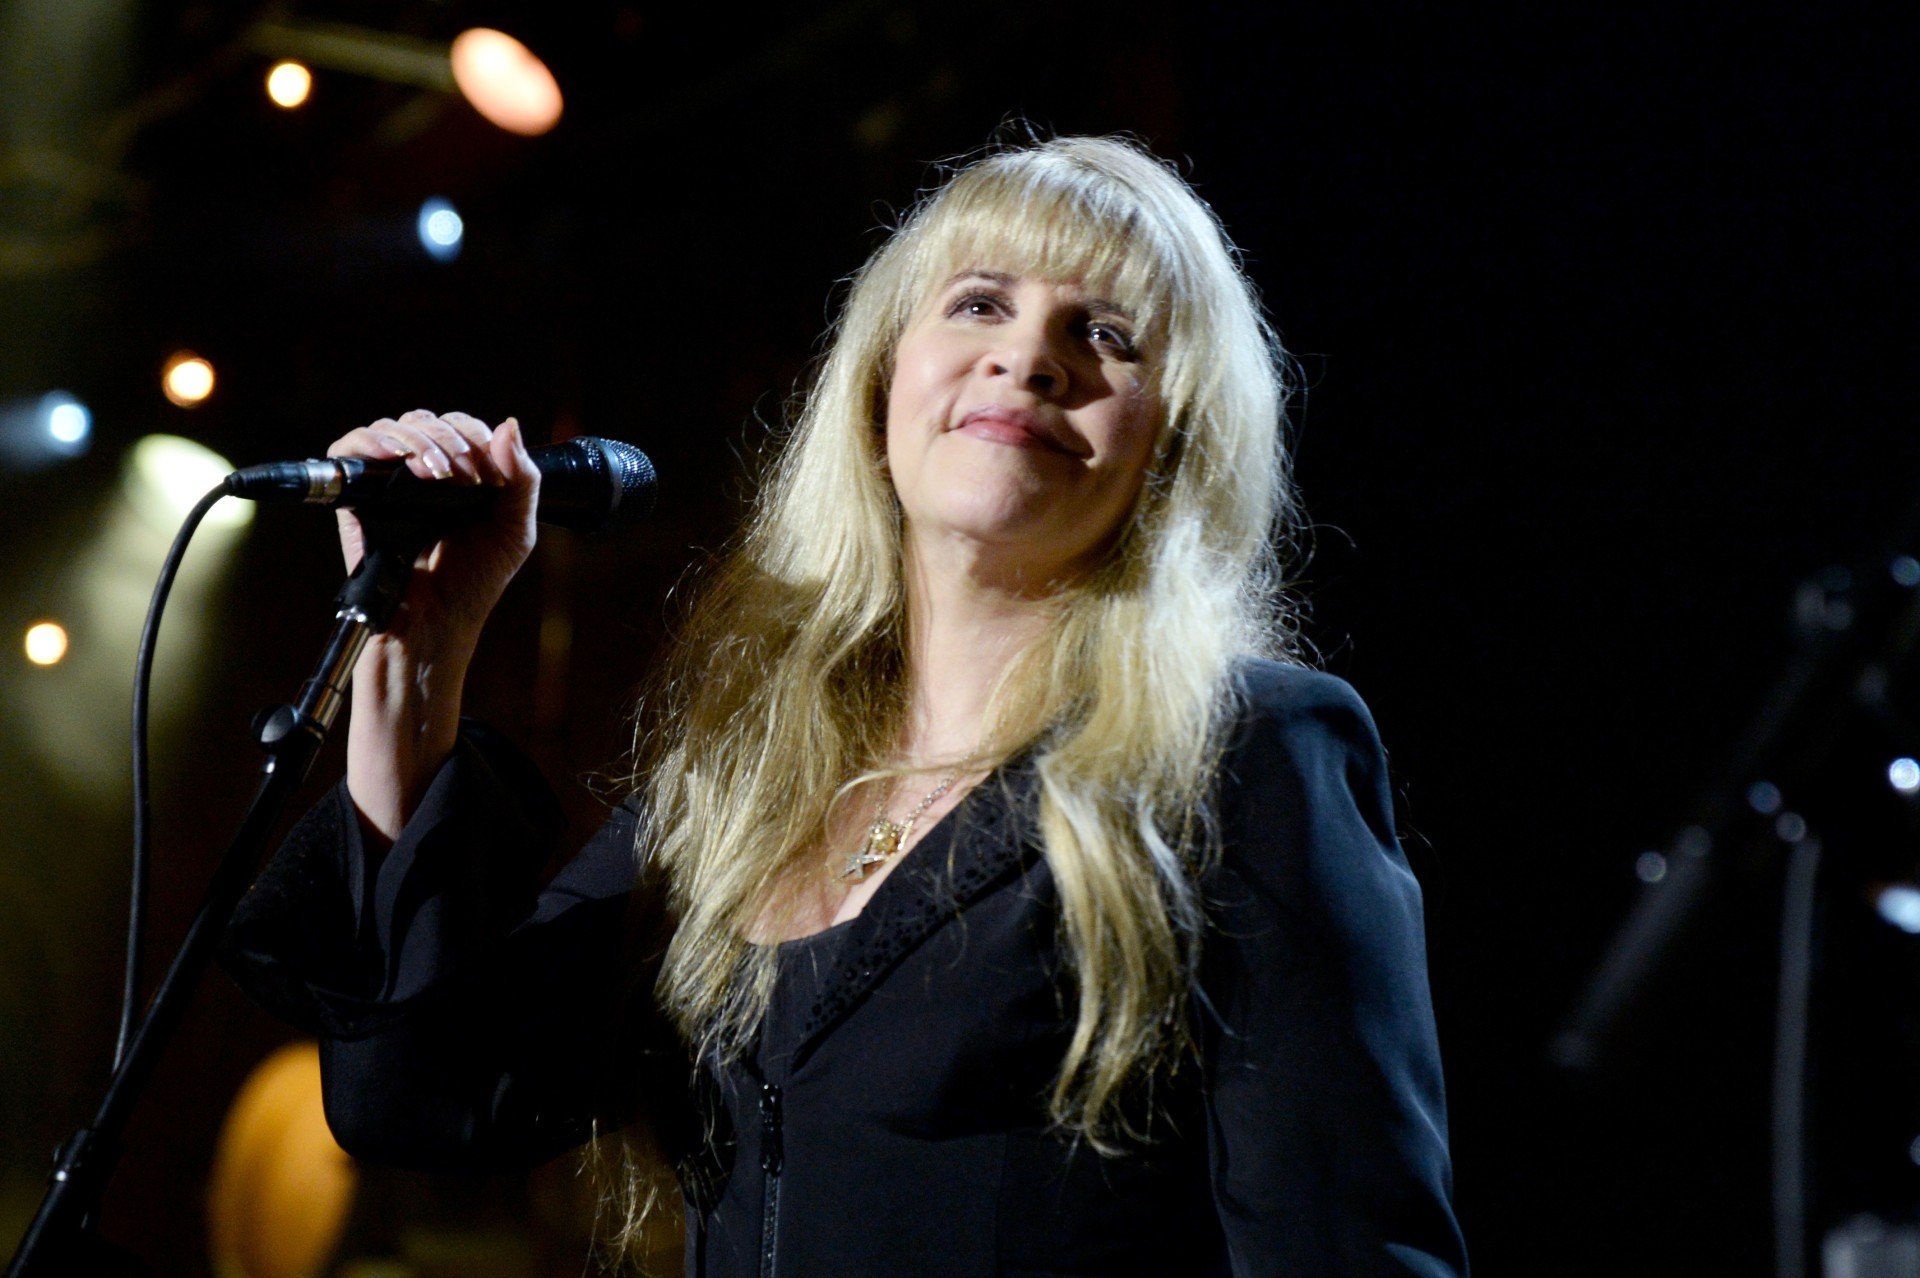 Stevie Nicks stands in front of a microphone while wearing a black outfit with flared sleeves